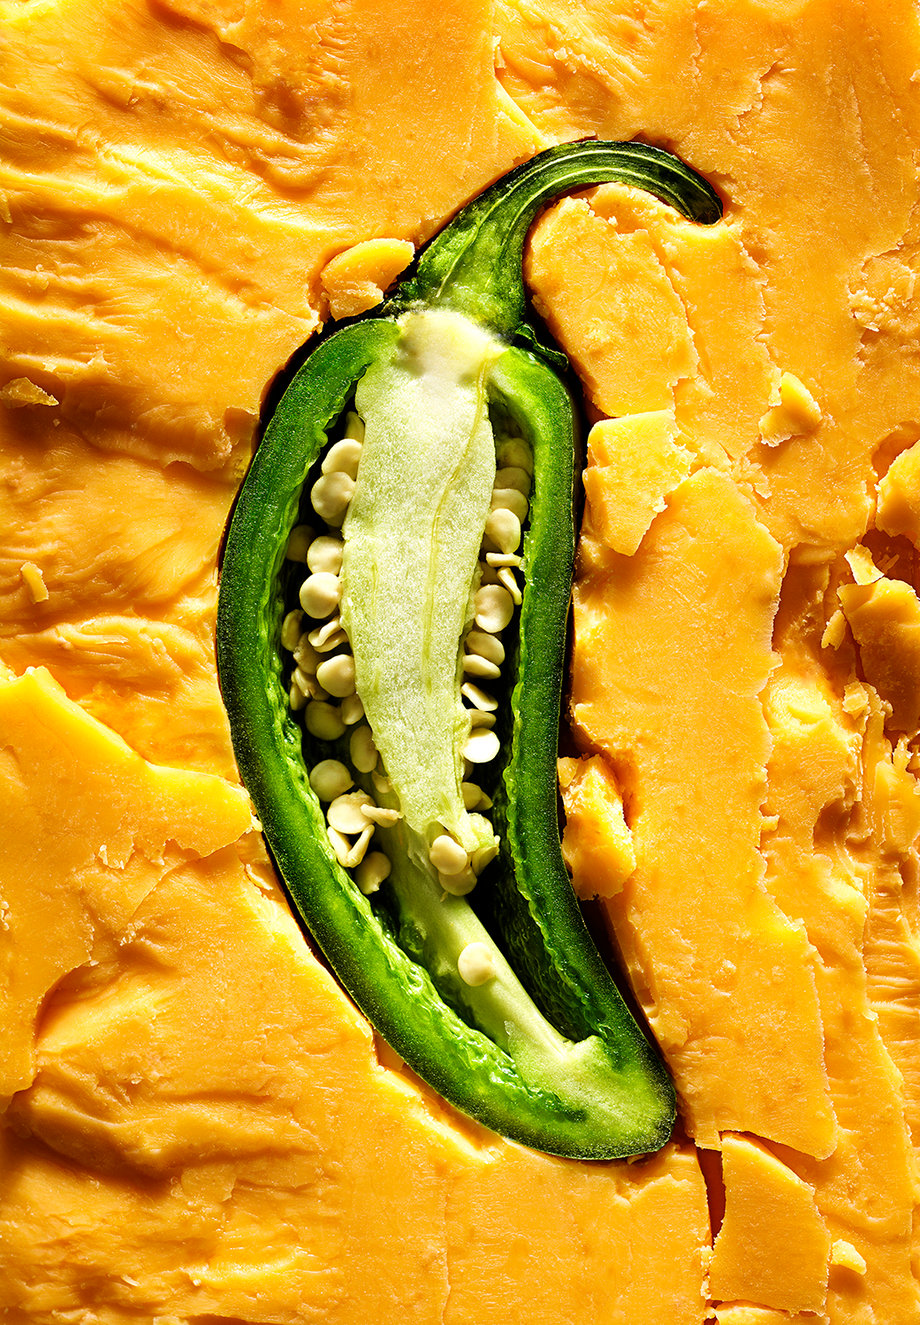 Justin Paris combines jalapeno with cheddar